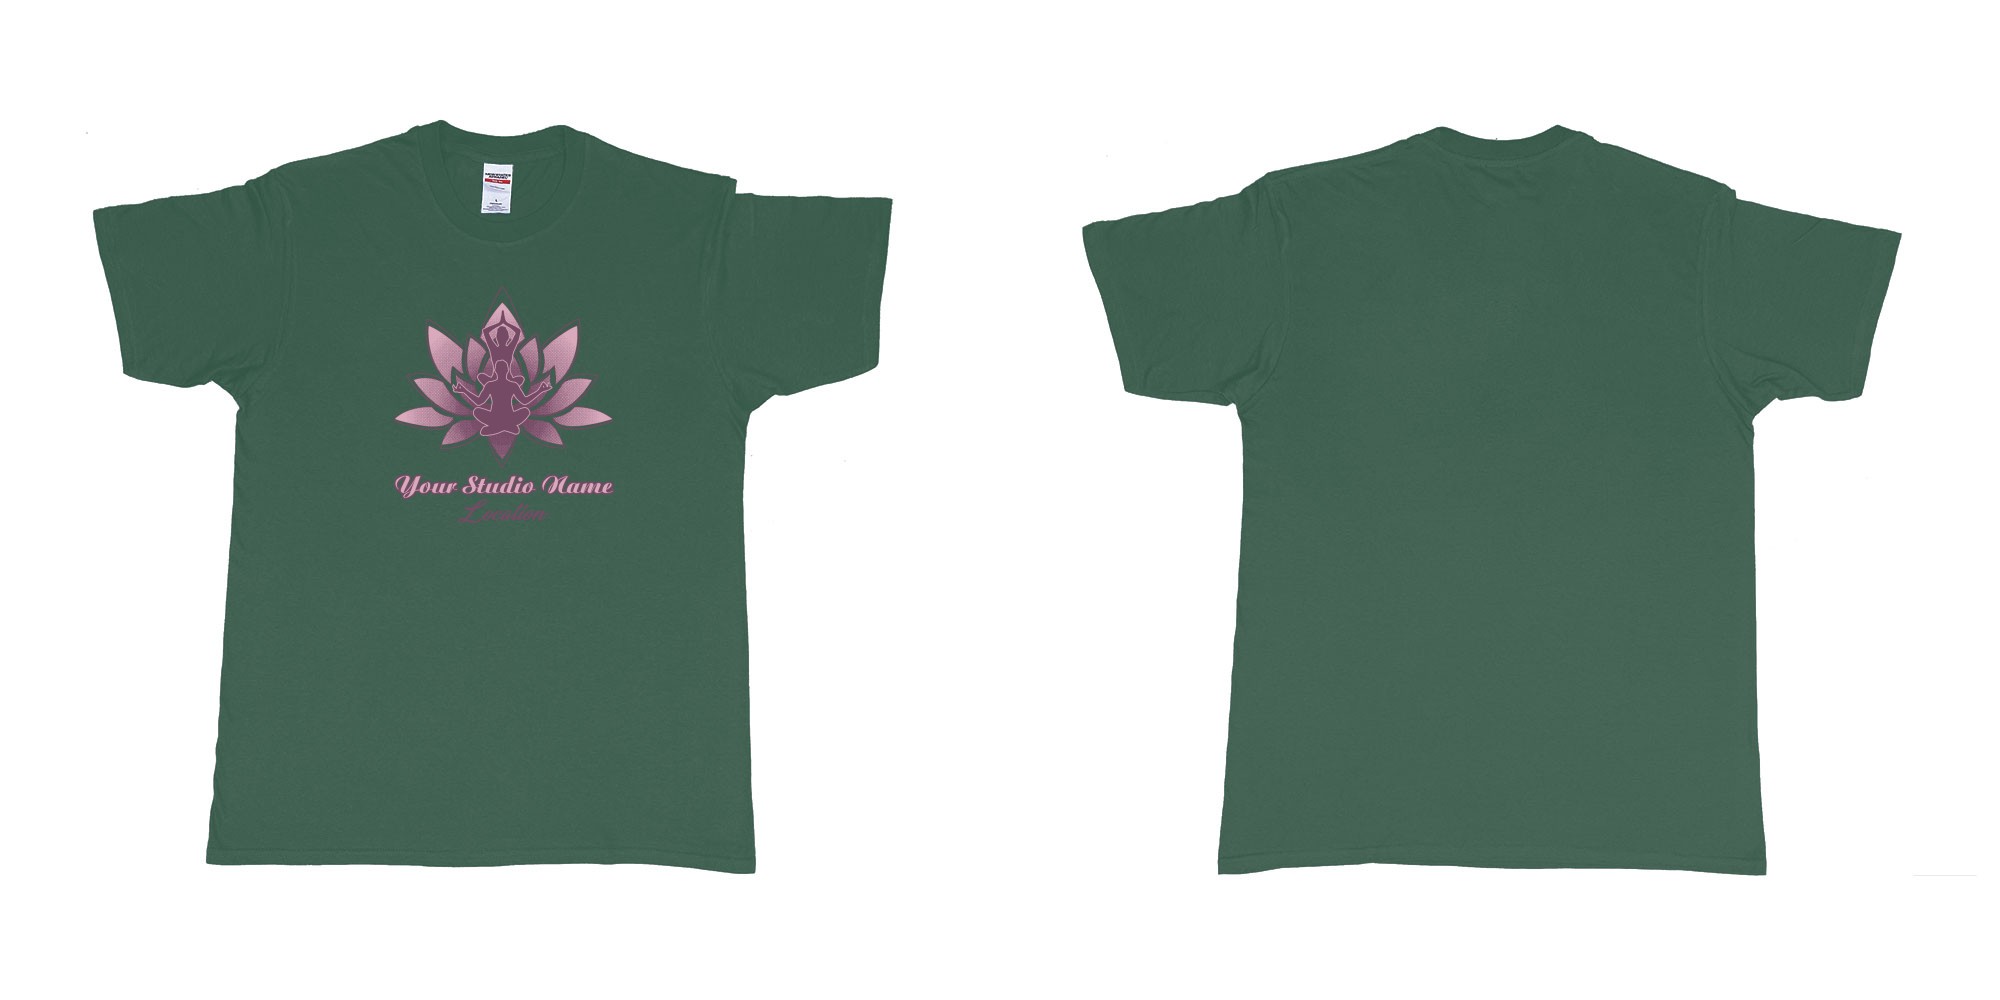 Custom tshirt design yoga meditation lotus own studio t shirt screen printing bali in fabric color forest-green choice your own text made in Bali by The Pirate Way